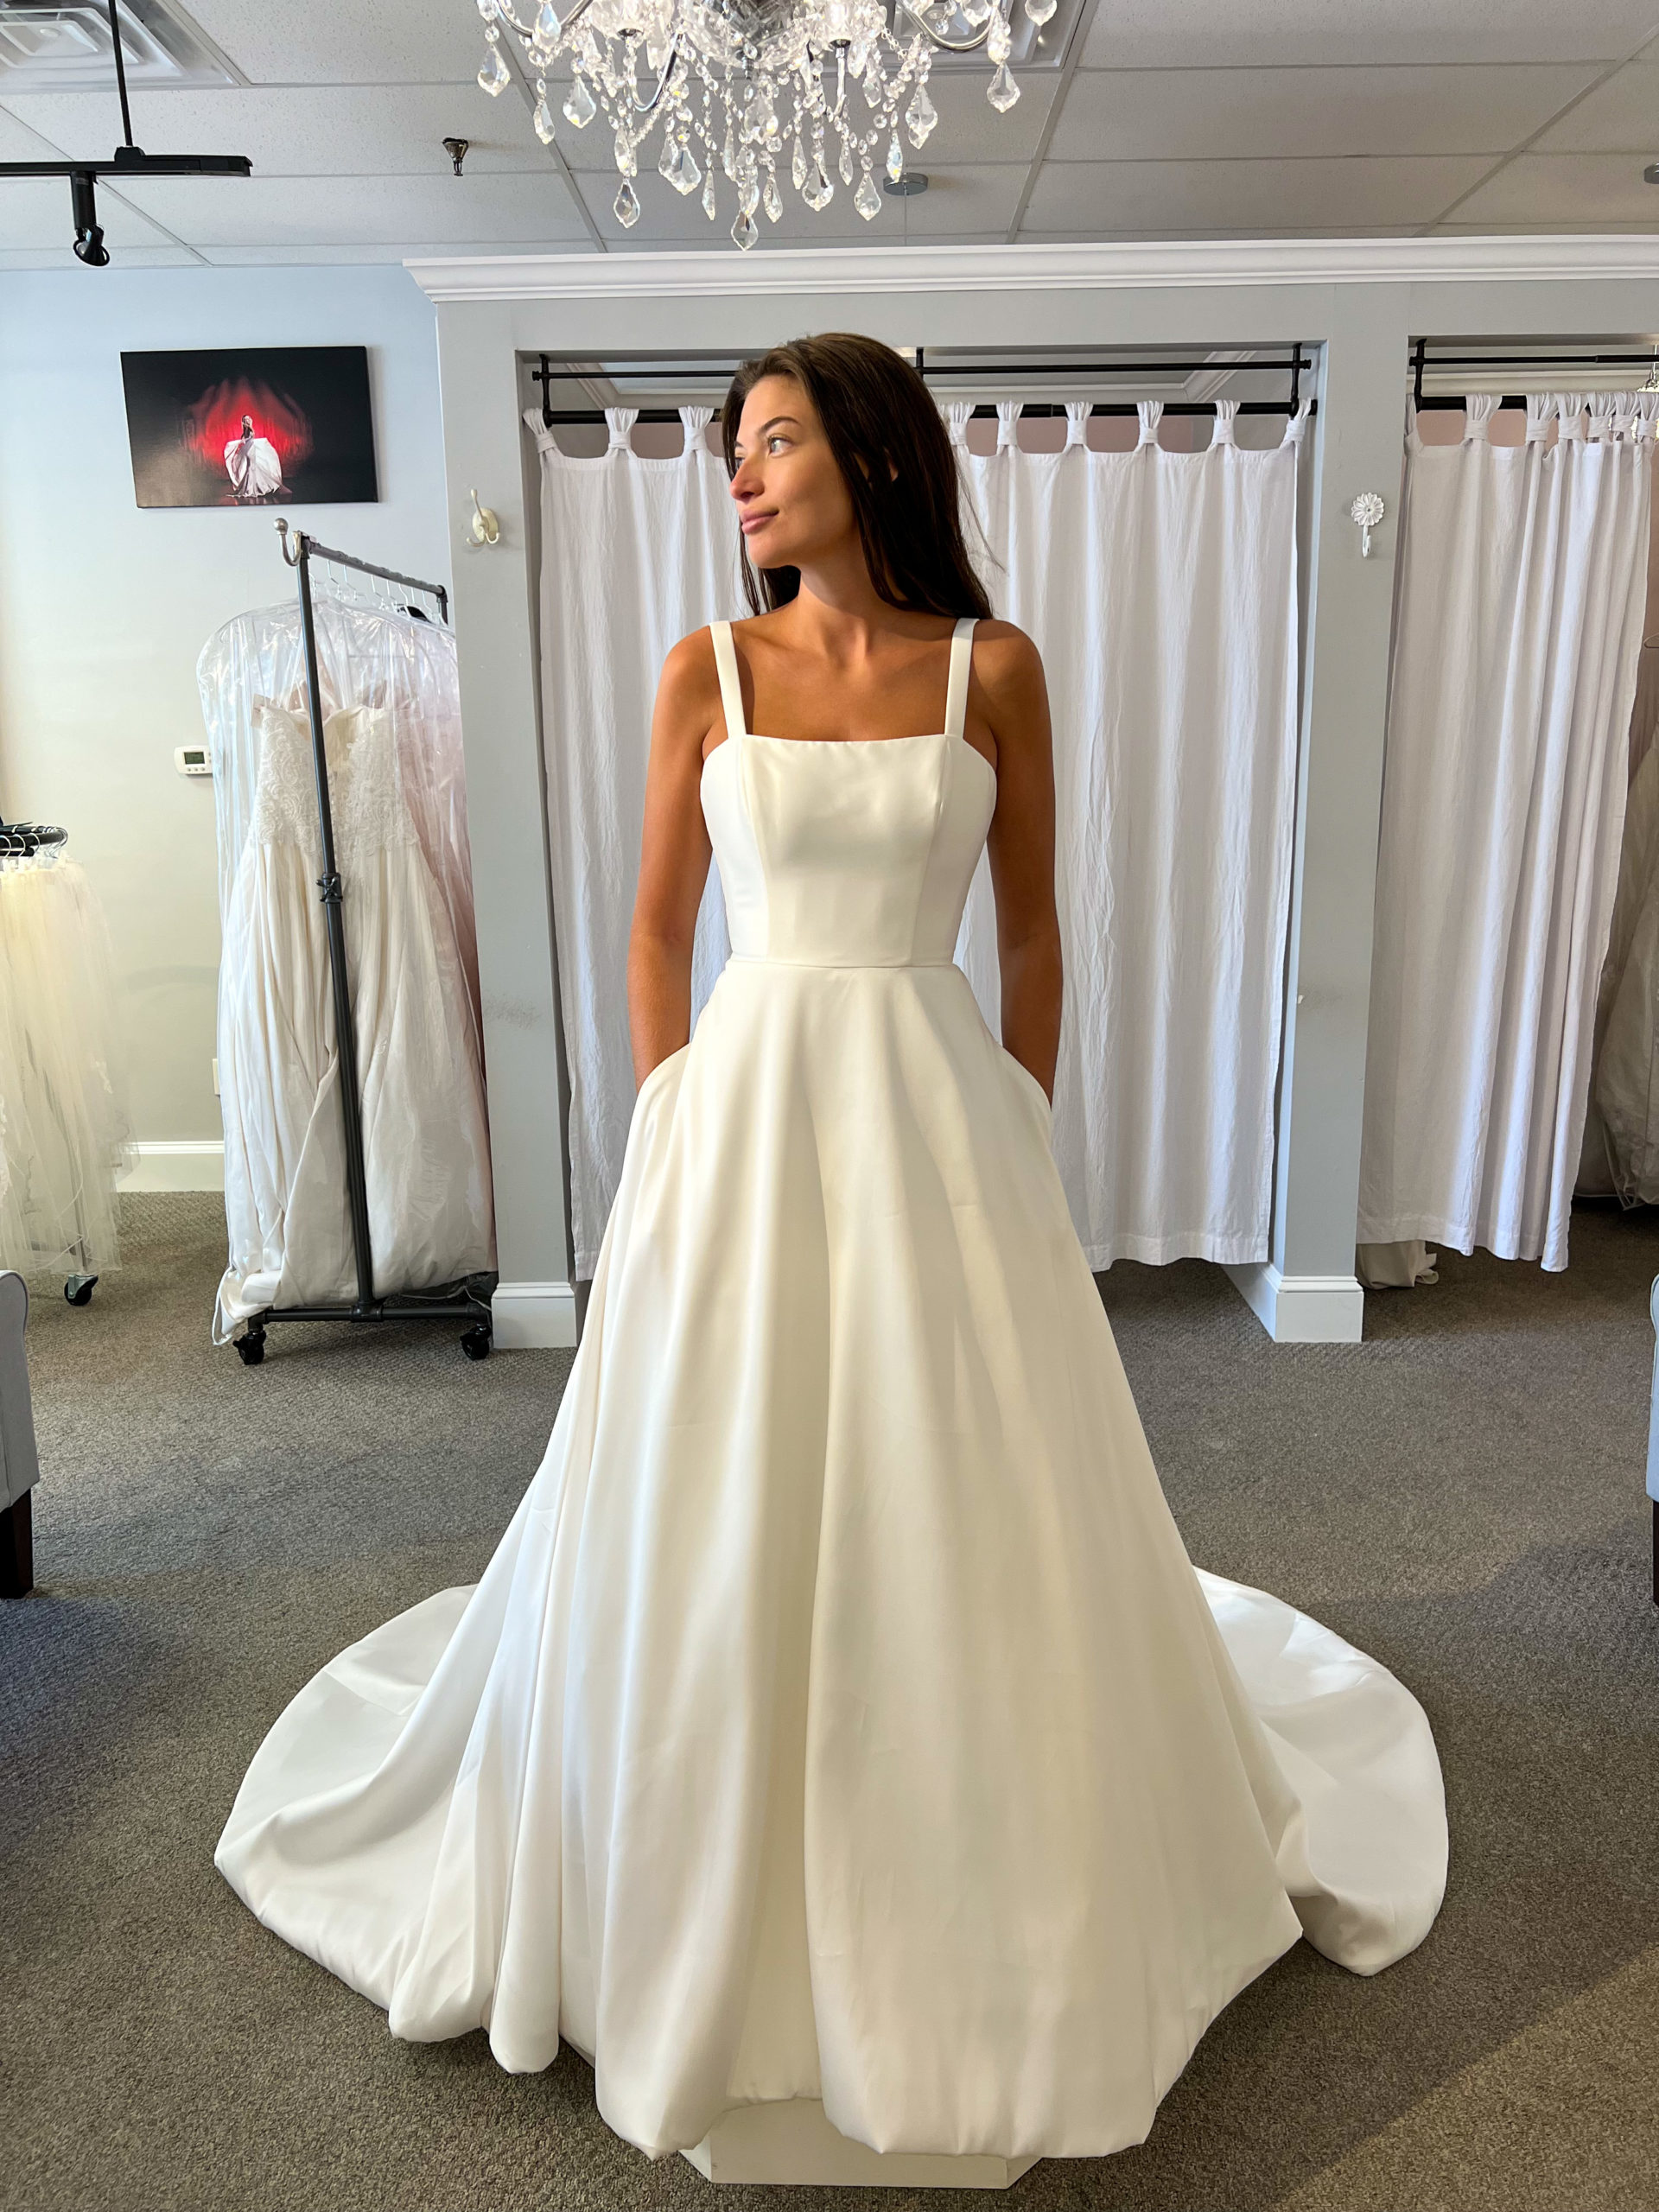 Bridal Gowns - Serendipity Bridal Collections